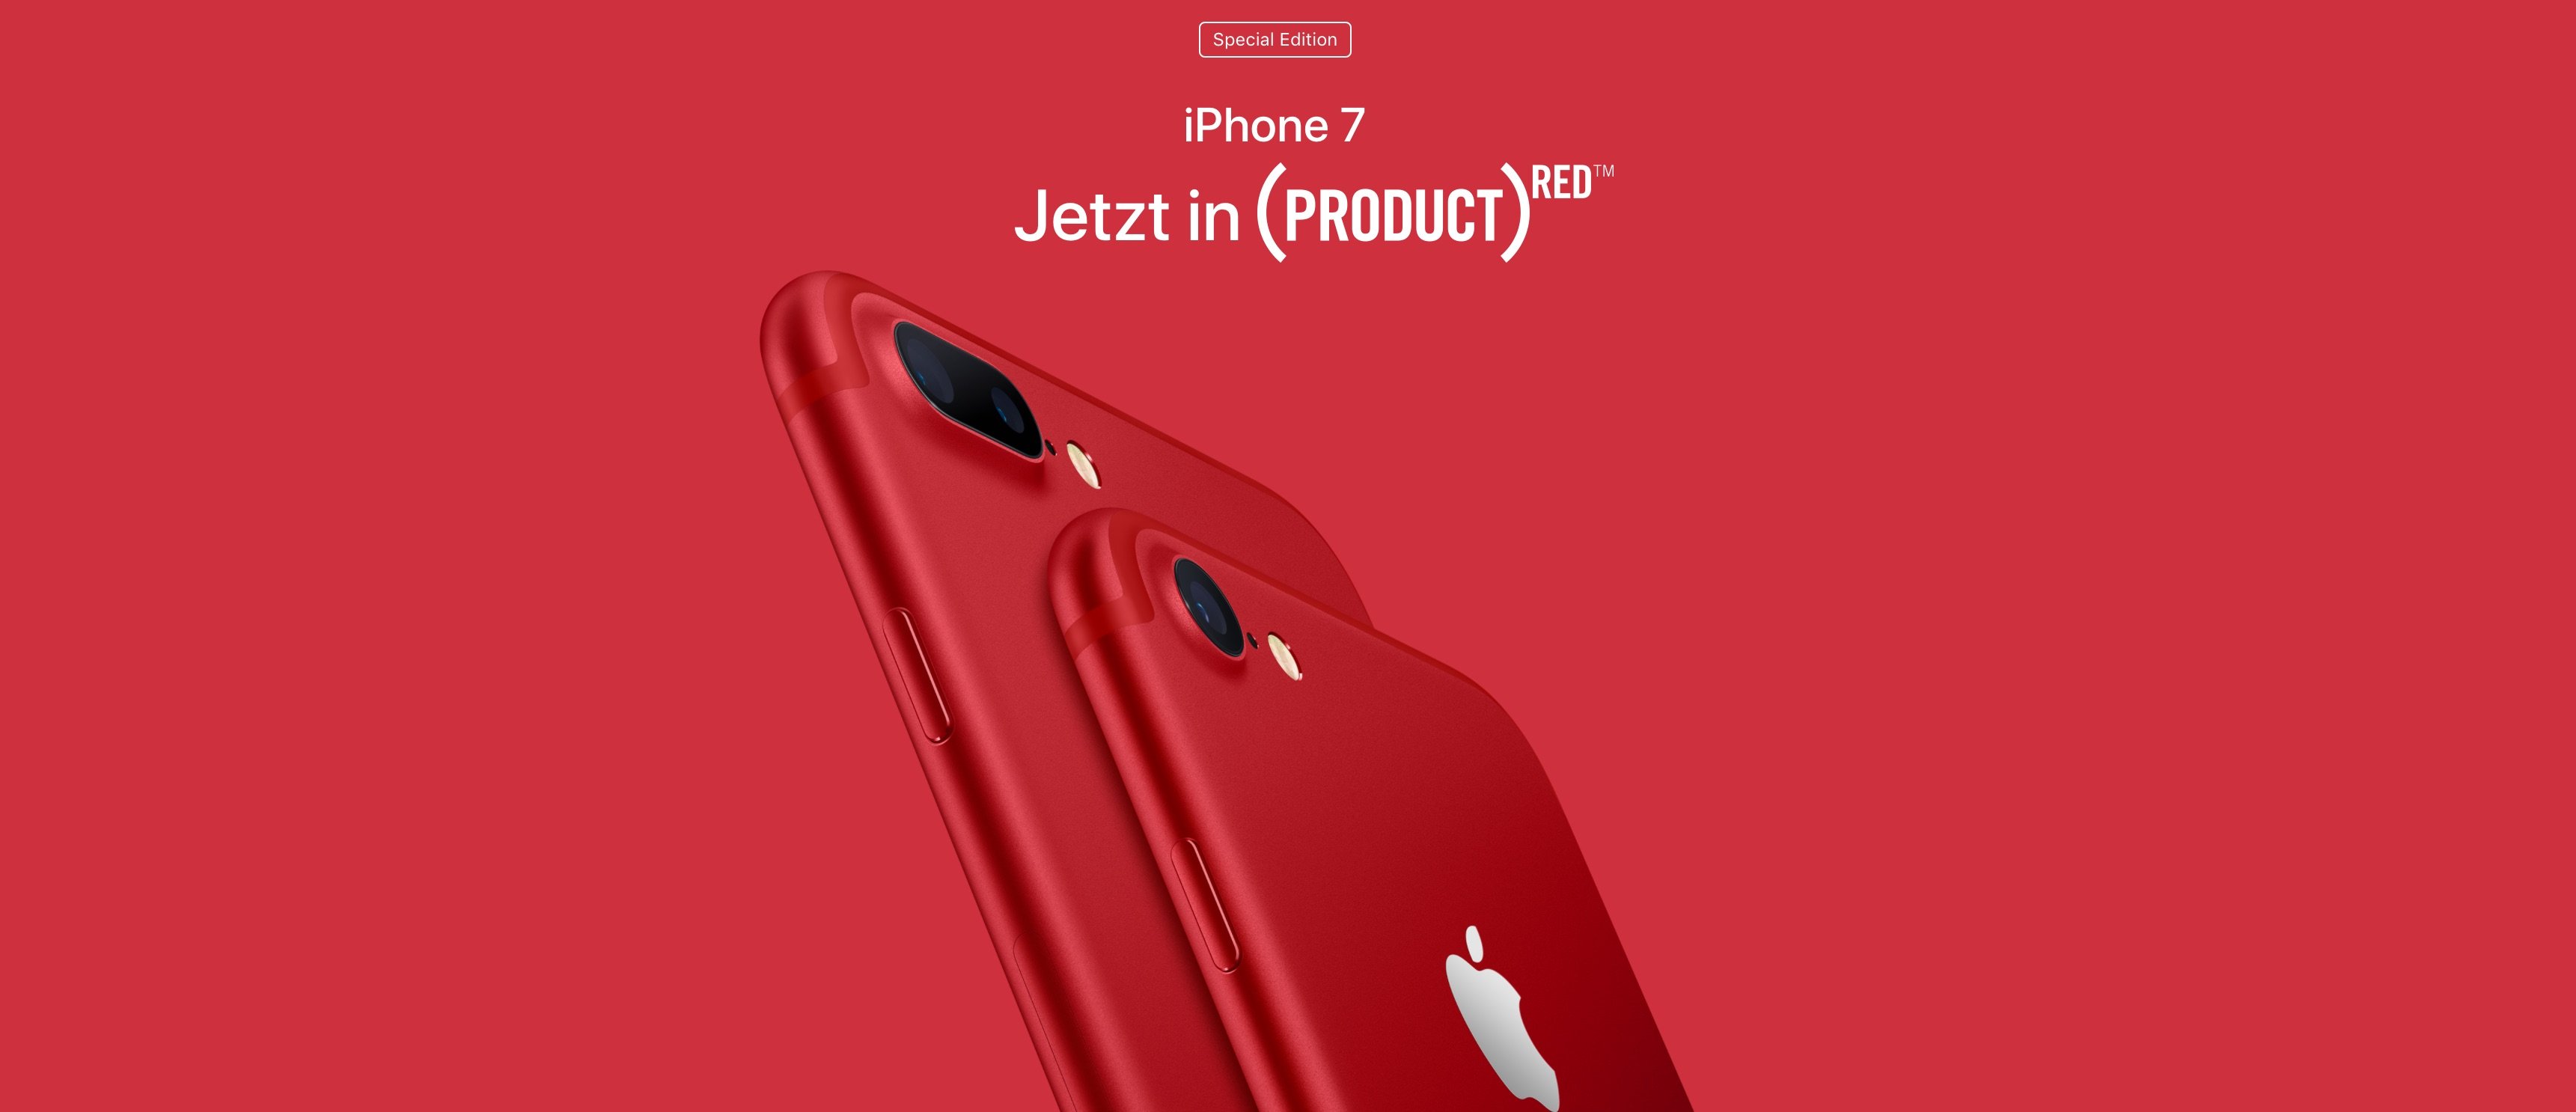 Apple iPhone 7 RED im Hands-on Video 4